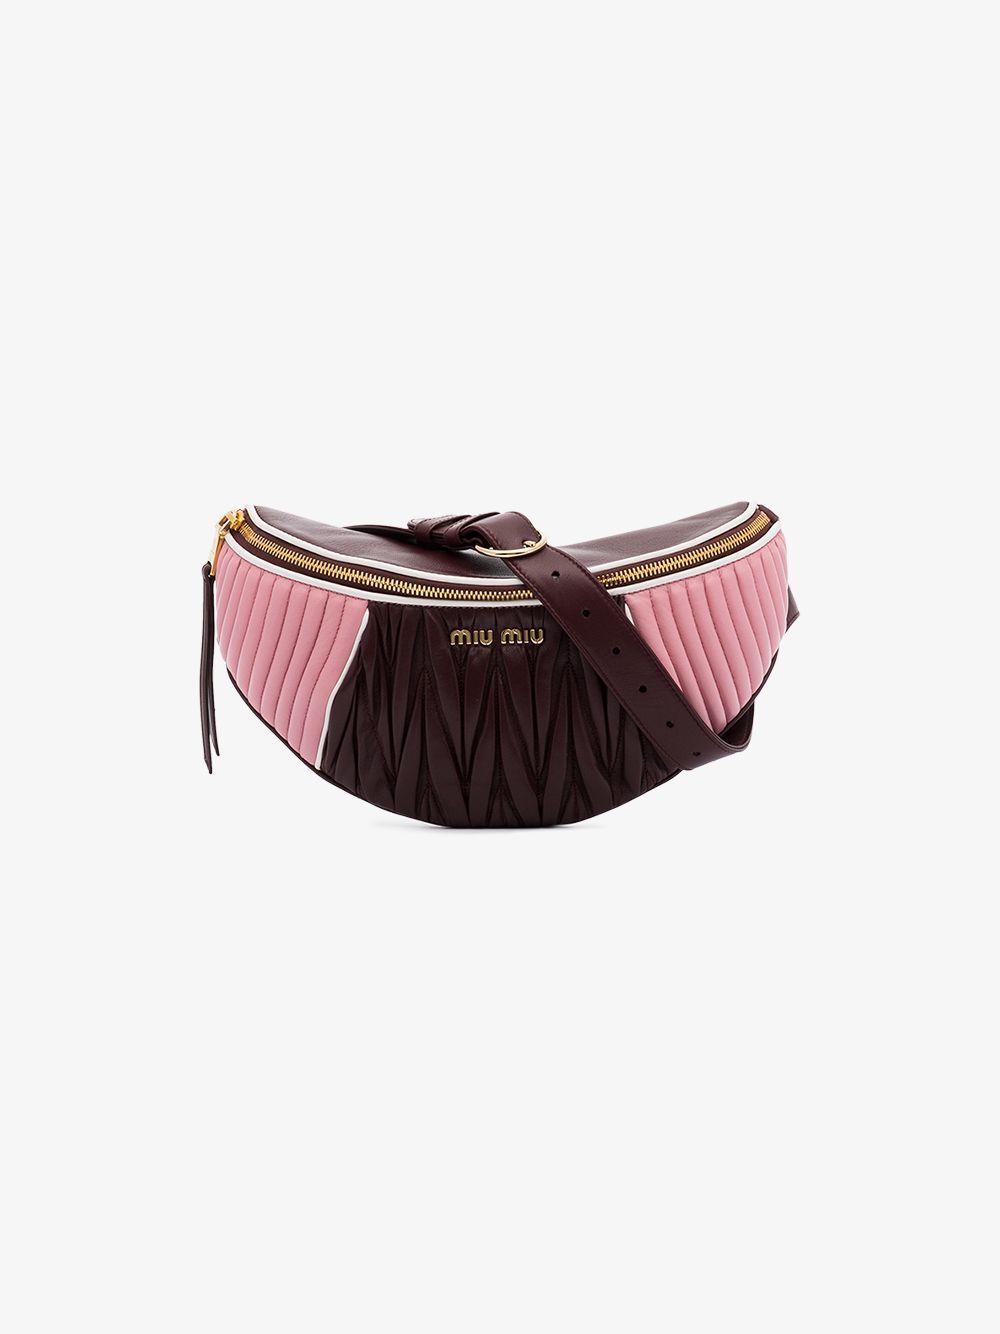 Miu Miu Pink brown Rider quilted leather belt bag | Browns Fashion